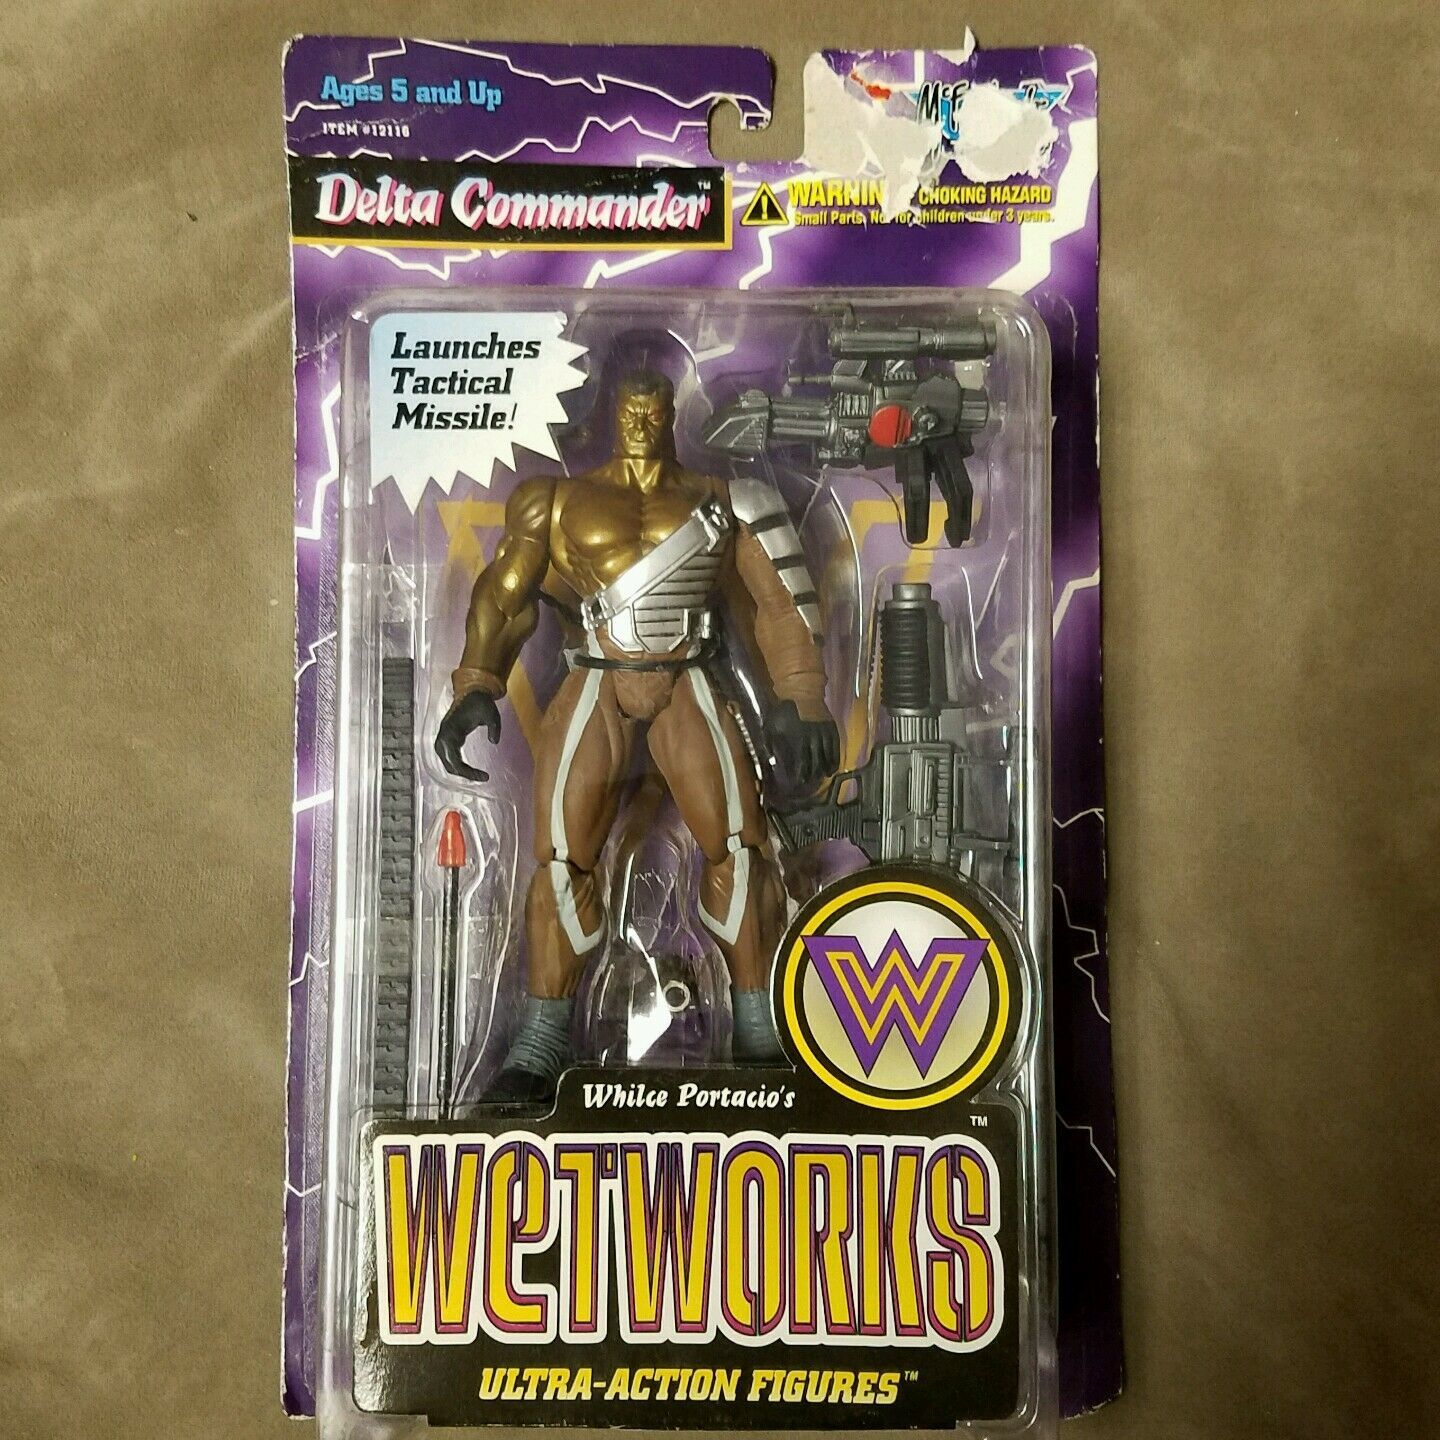 Primary image for McFarlane Toys Whilce Portacios Wetworks Ultra Action Figure NIP Delta-Commander